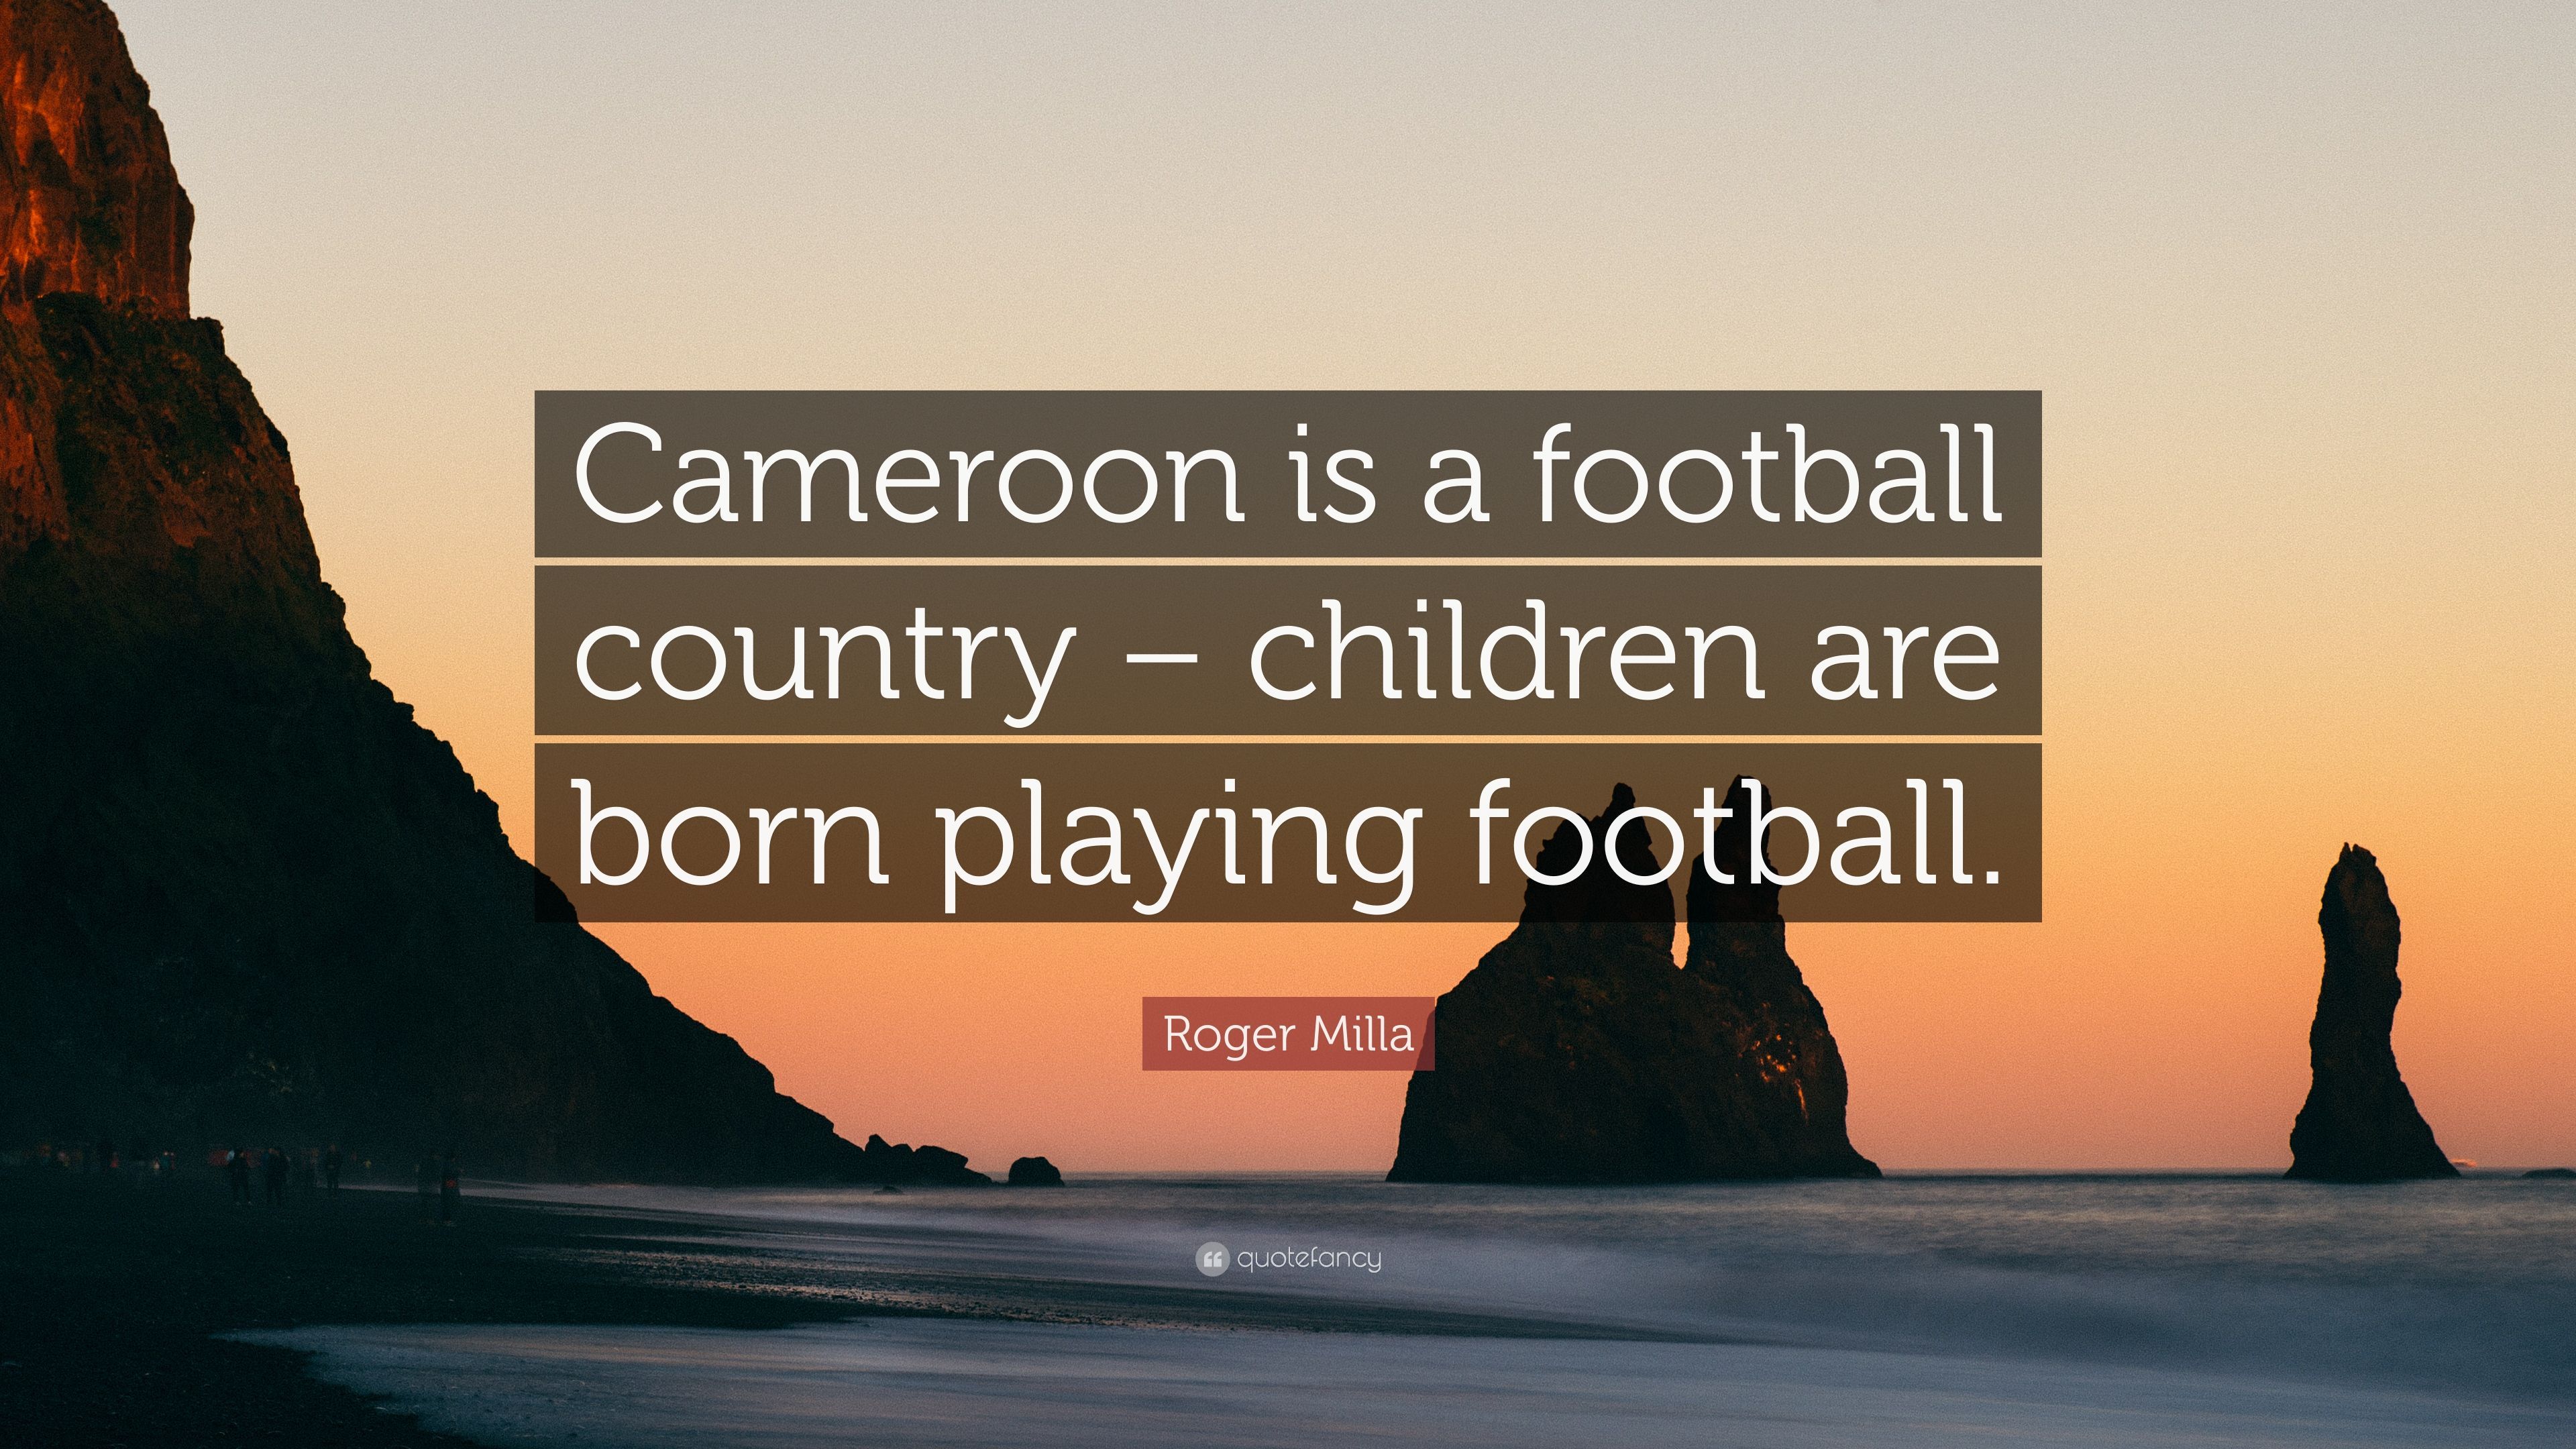 Roger Milla Quote: “Cameroon is a football country